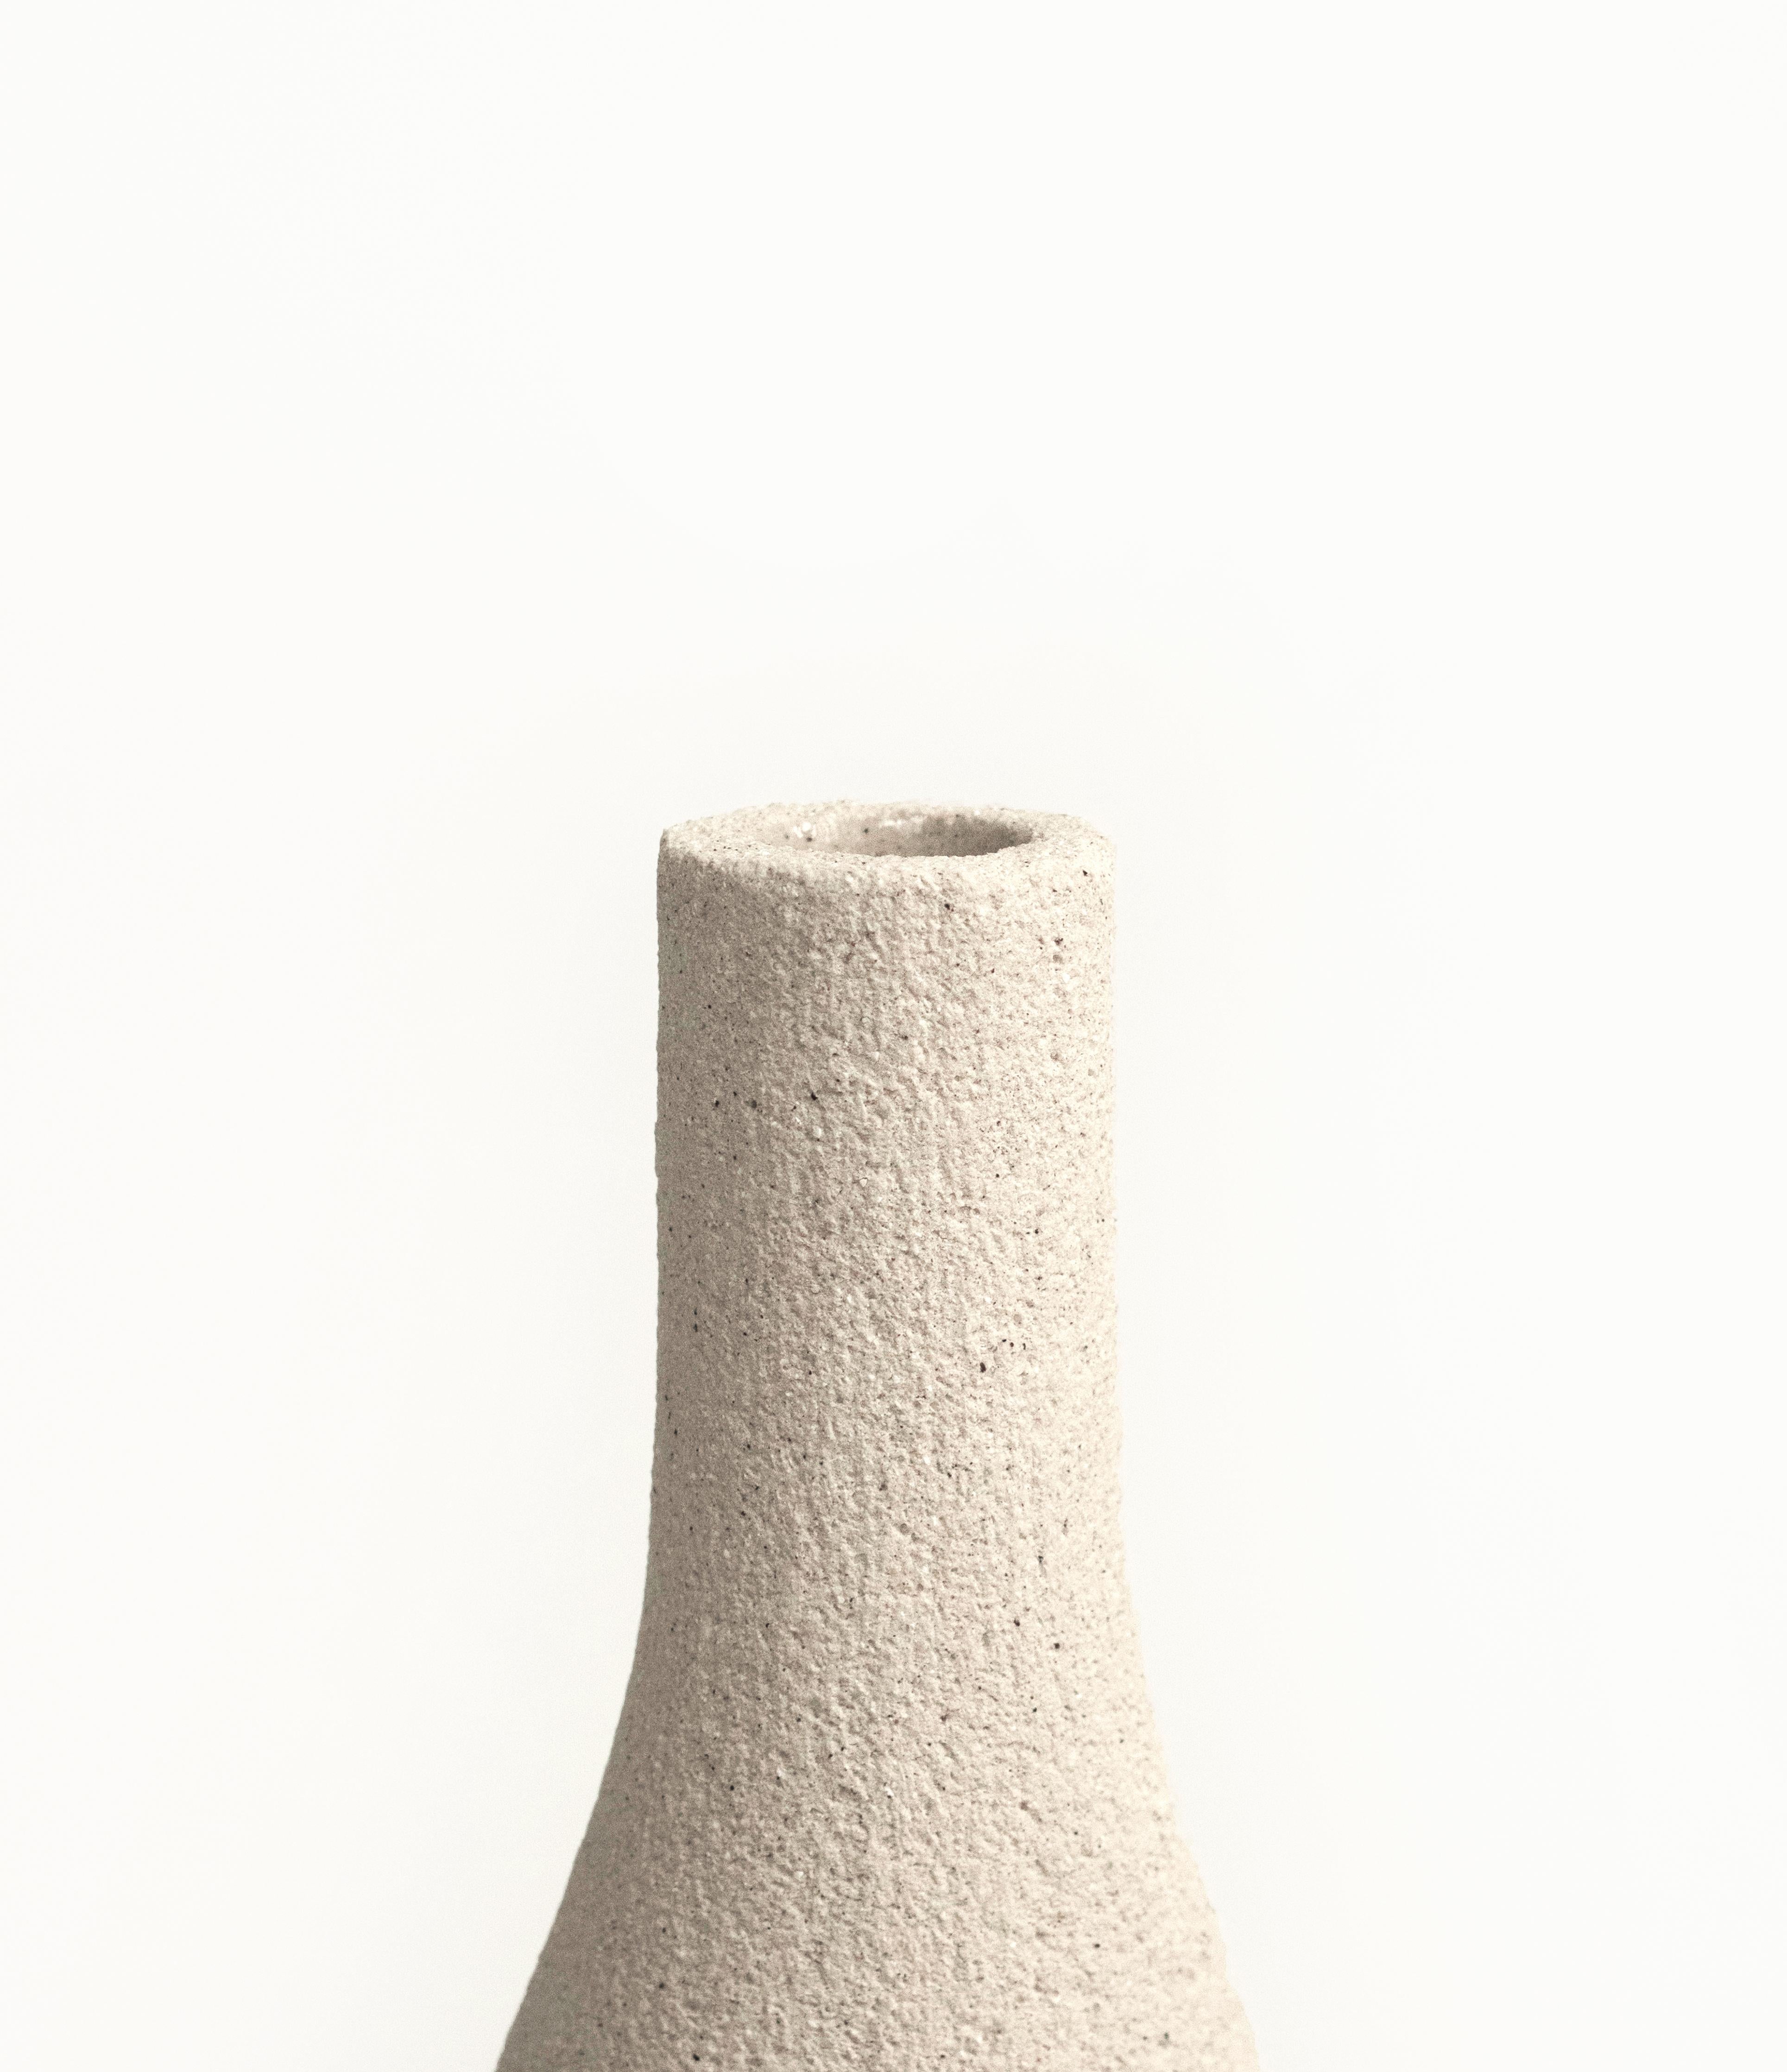 Minimalist 21st Century Bouteille 'M' Vase in White Ceramic, Hand-Crafted in France